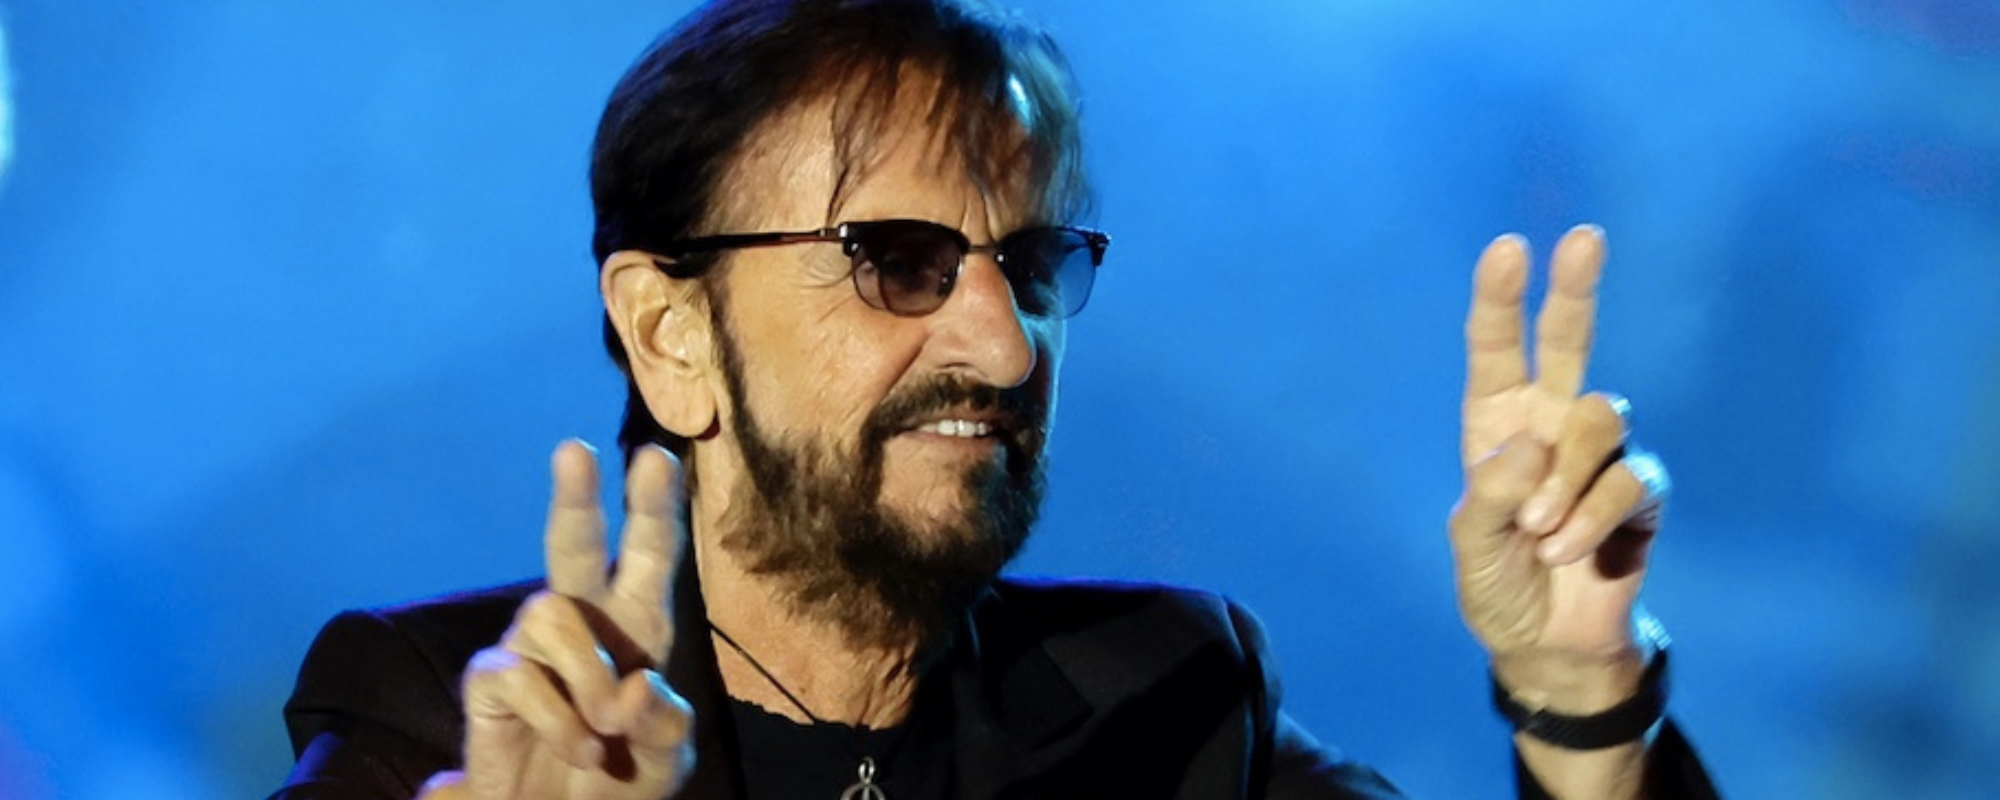 Ringo Starr Reveals Plans for a Full-Length Country Album, Shares Details About Next EP